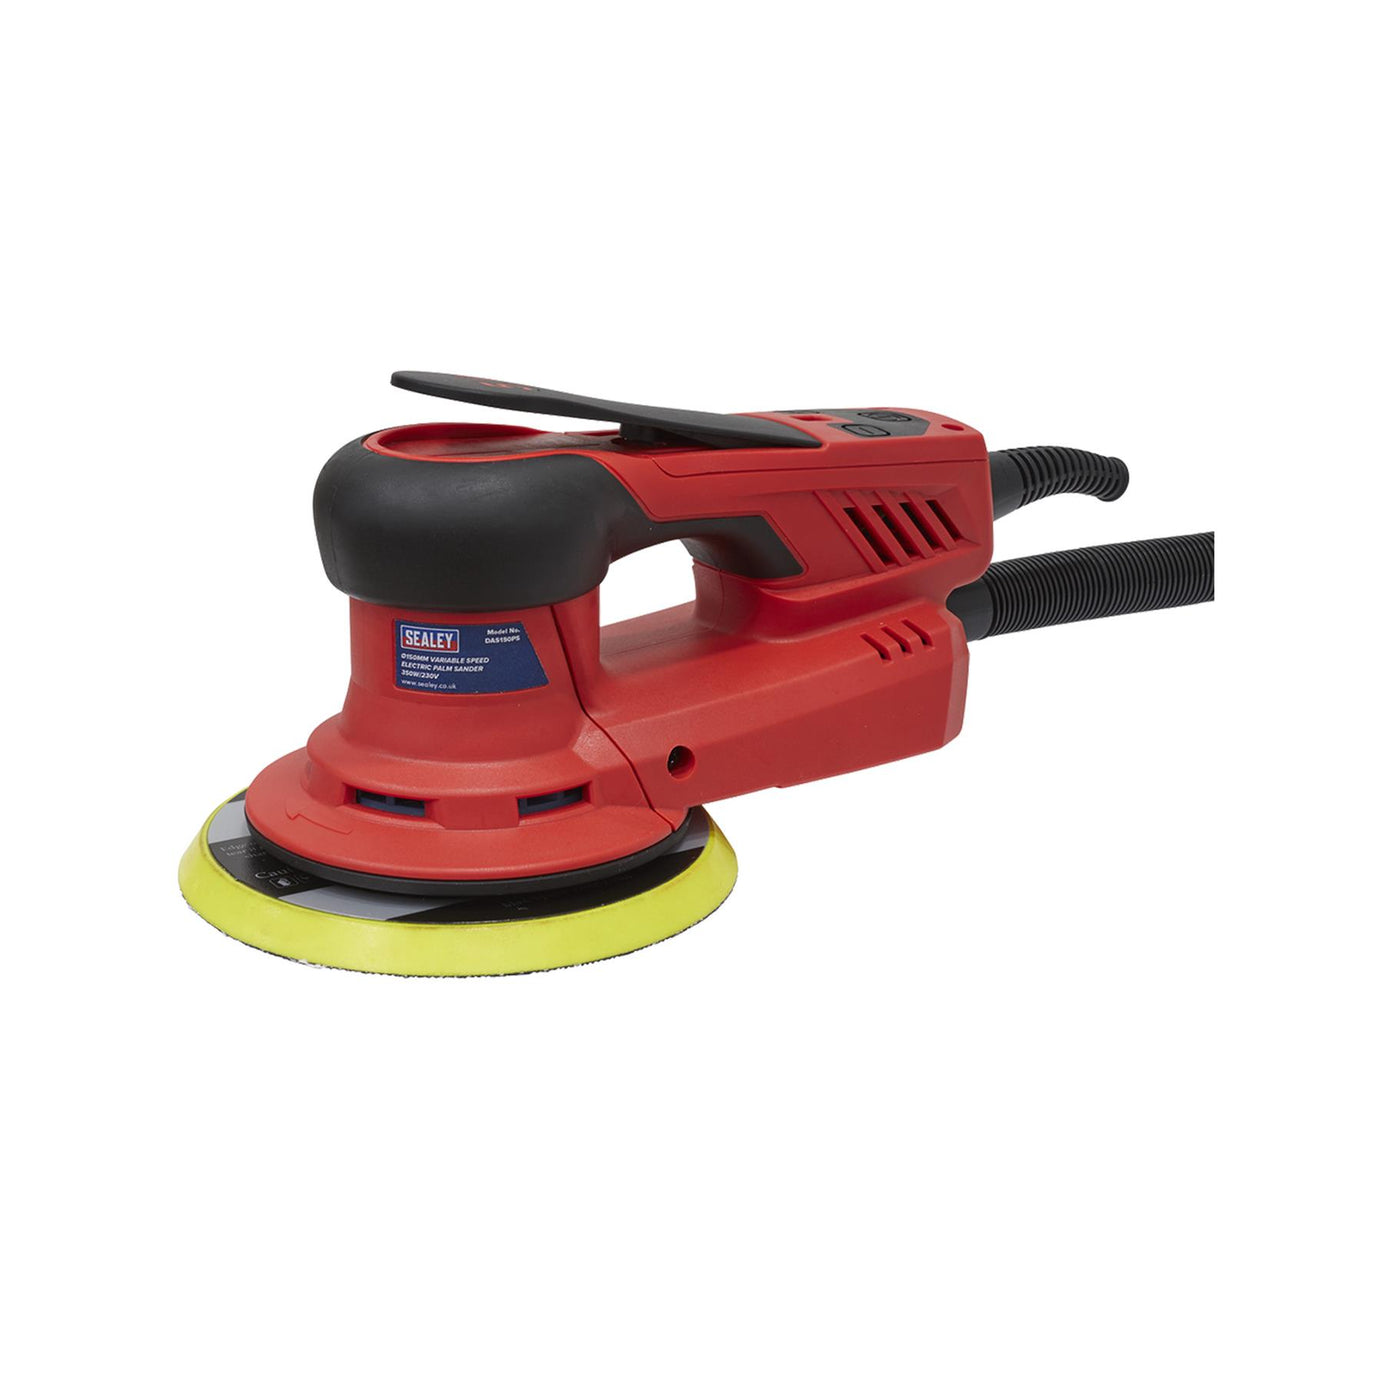 Sealey Electric Palm Sander 150mm Variable Speed 350W/230V